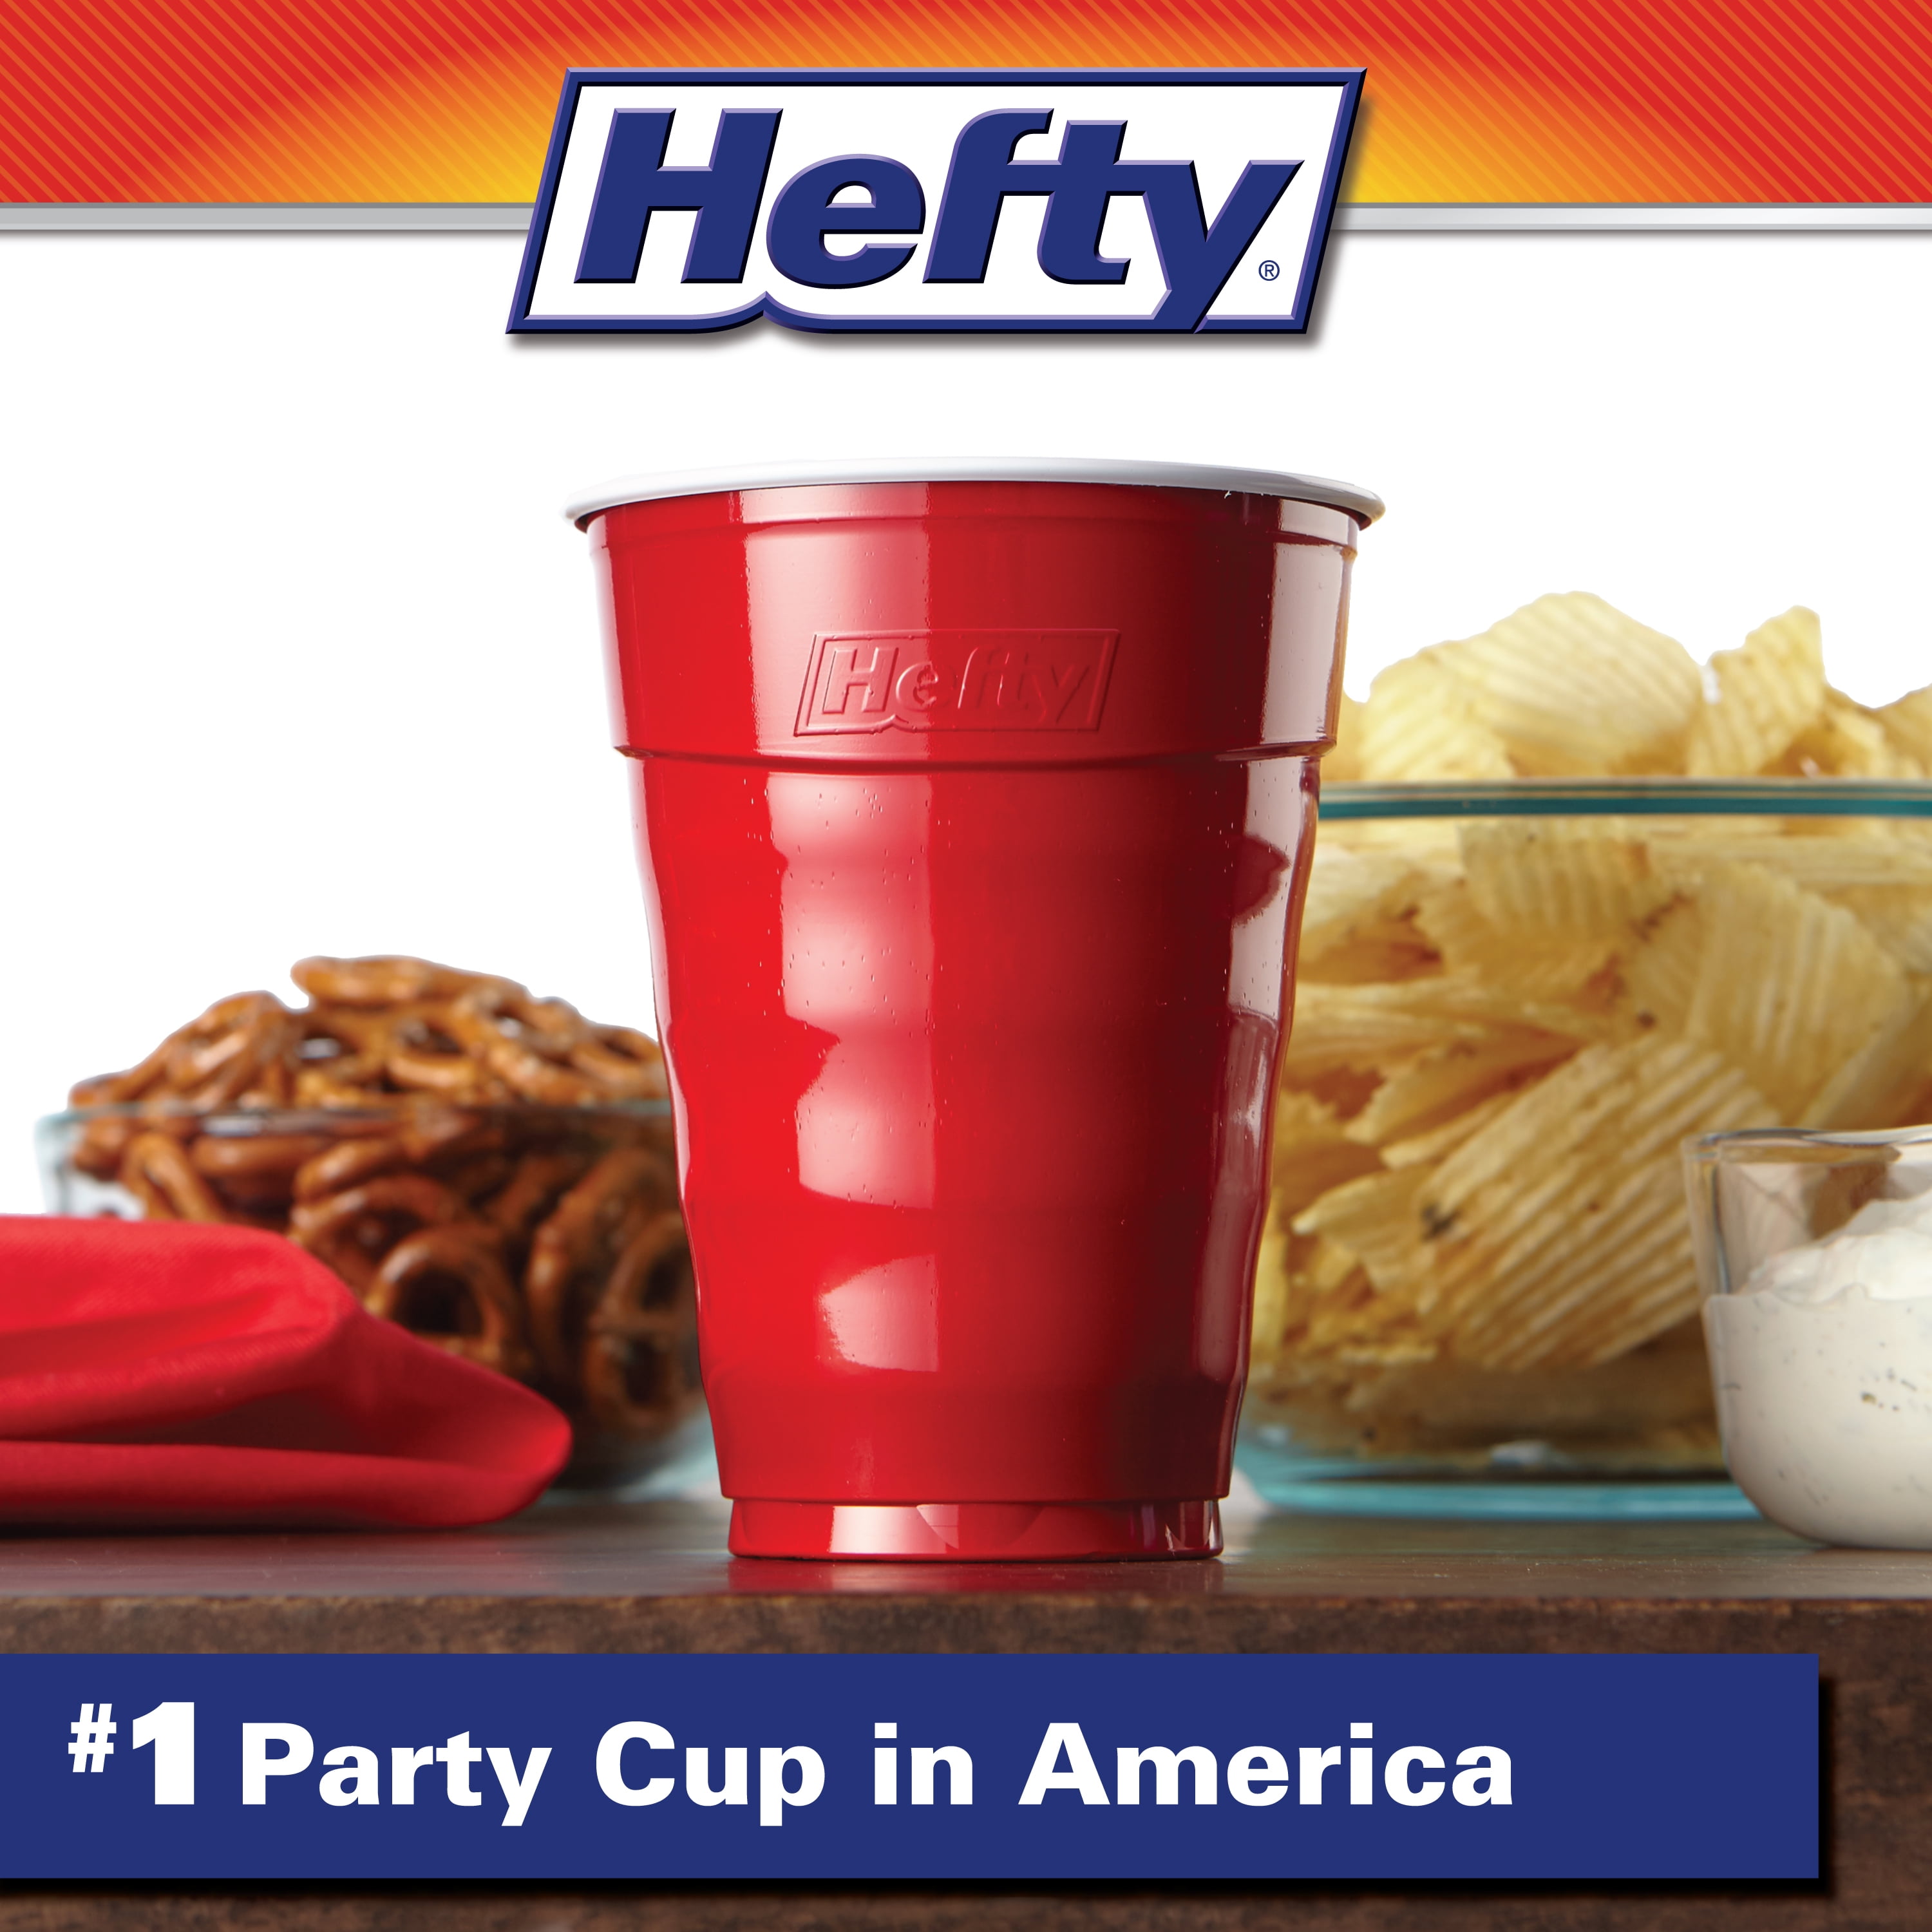 Hefty Party On Disposable Plastic Cups, Red, 18 Ounce, 50 Count 